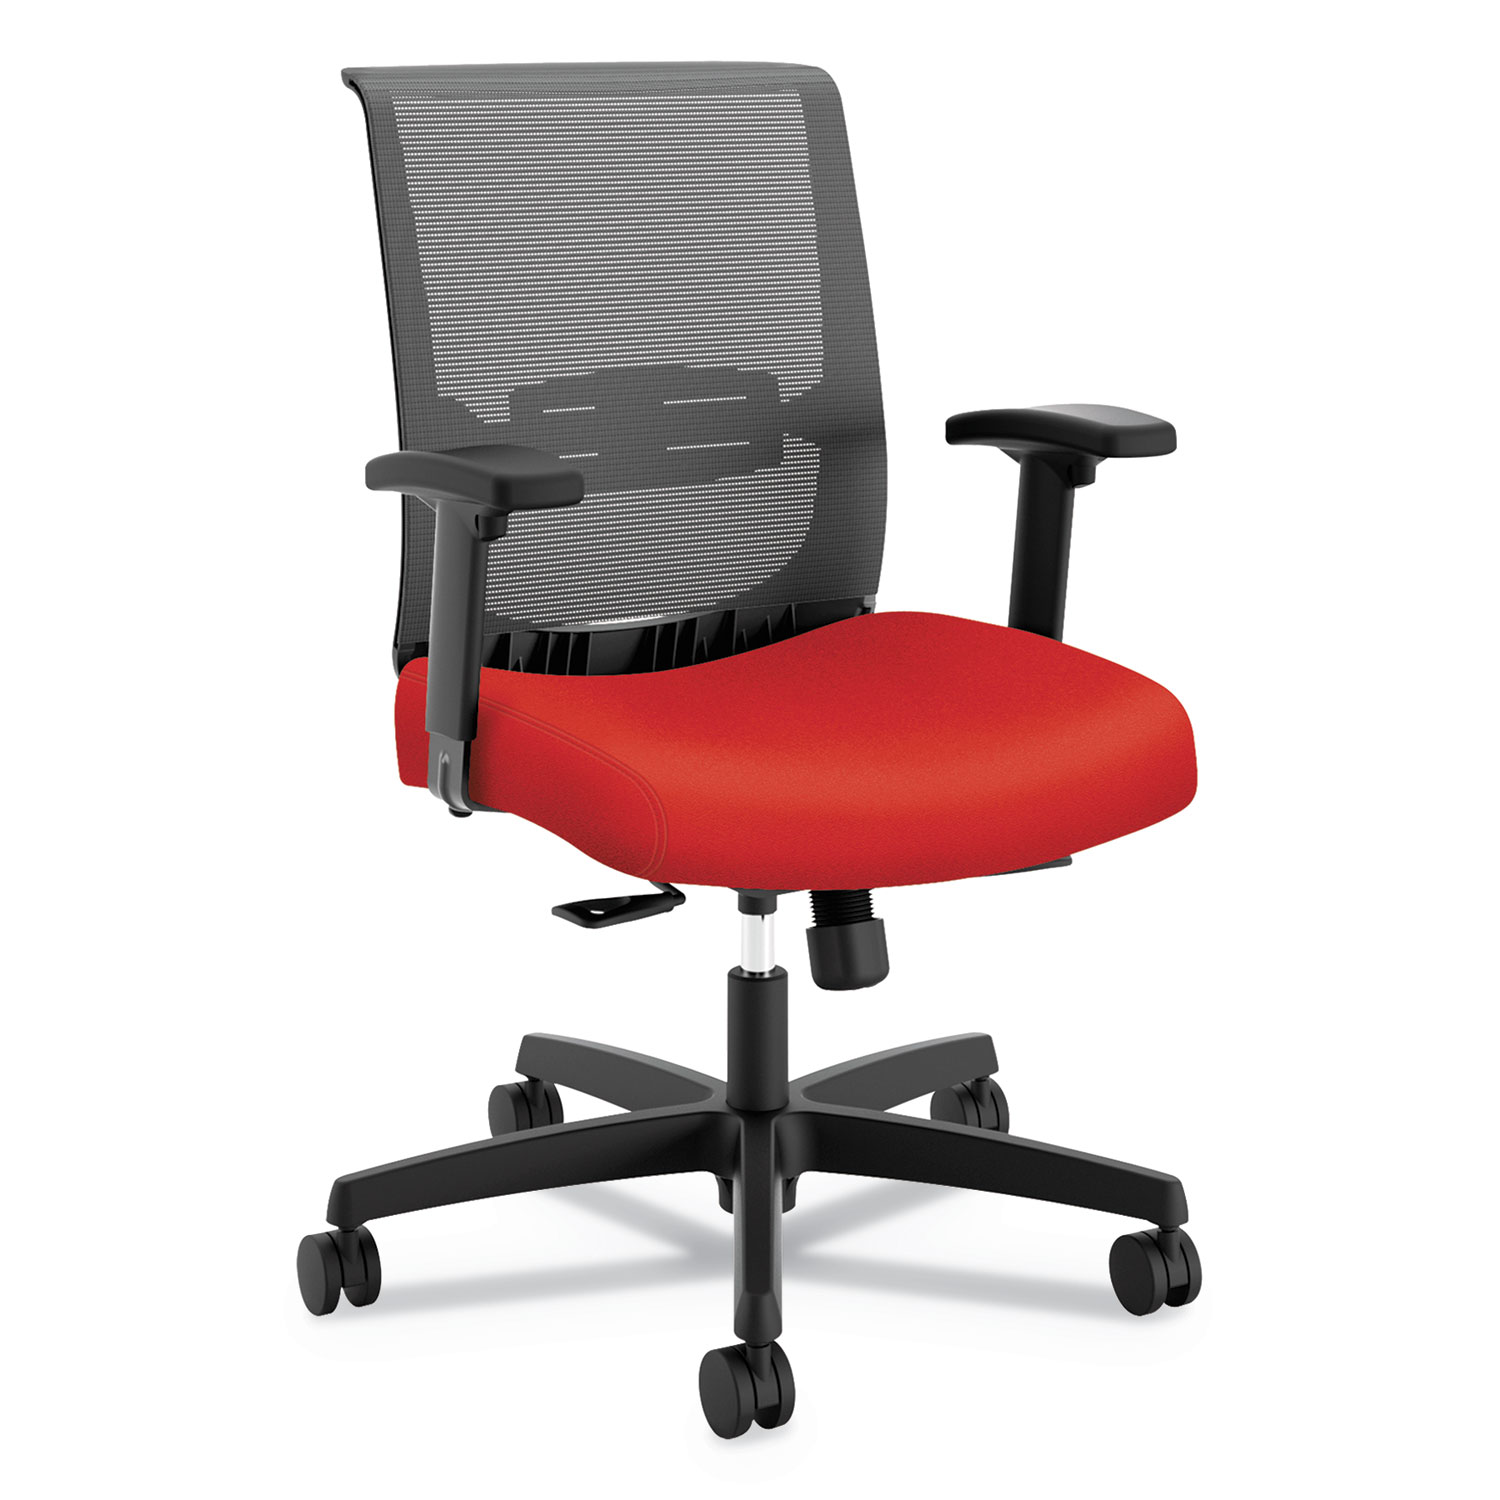  HON HONCMY1ACU67 Convergence Mid-Back Task Chair with Syncho-Tilt Control with Seat Slide, Supports up to 275 lbs, Red Seat, Black Back/Base (HONCMY1ACU67) 